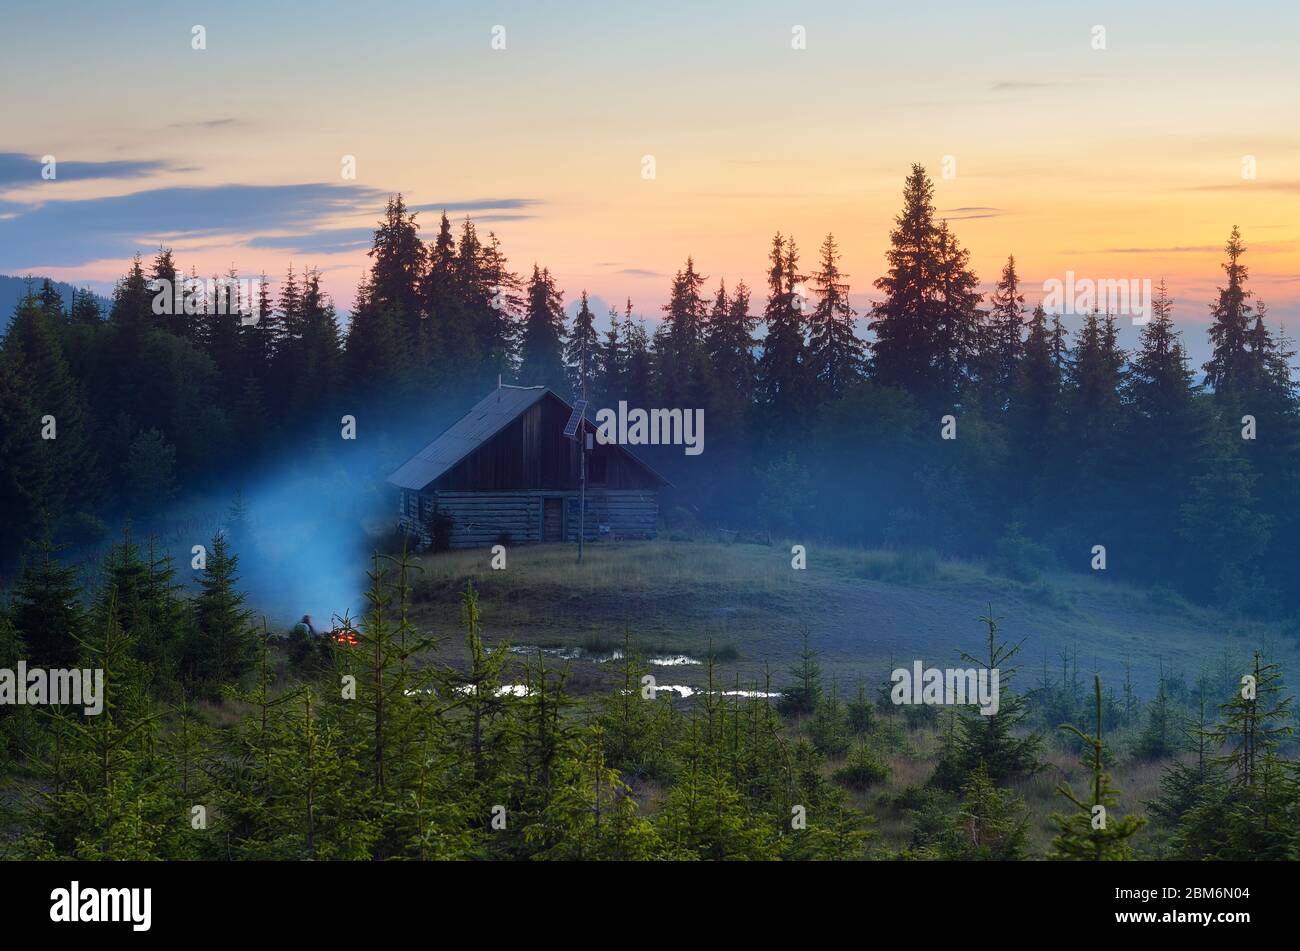 Summer evening. Mountain landscape. Camping in nature. Bonfire near the house Stock Photo